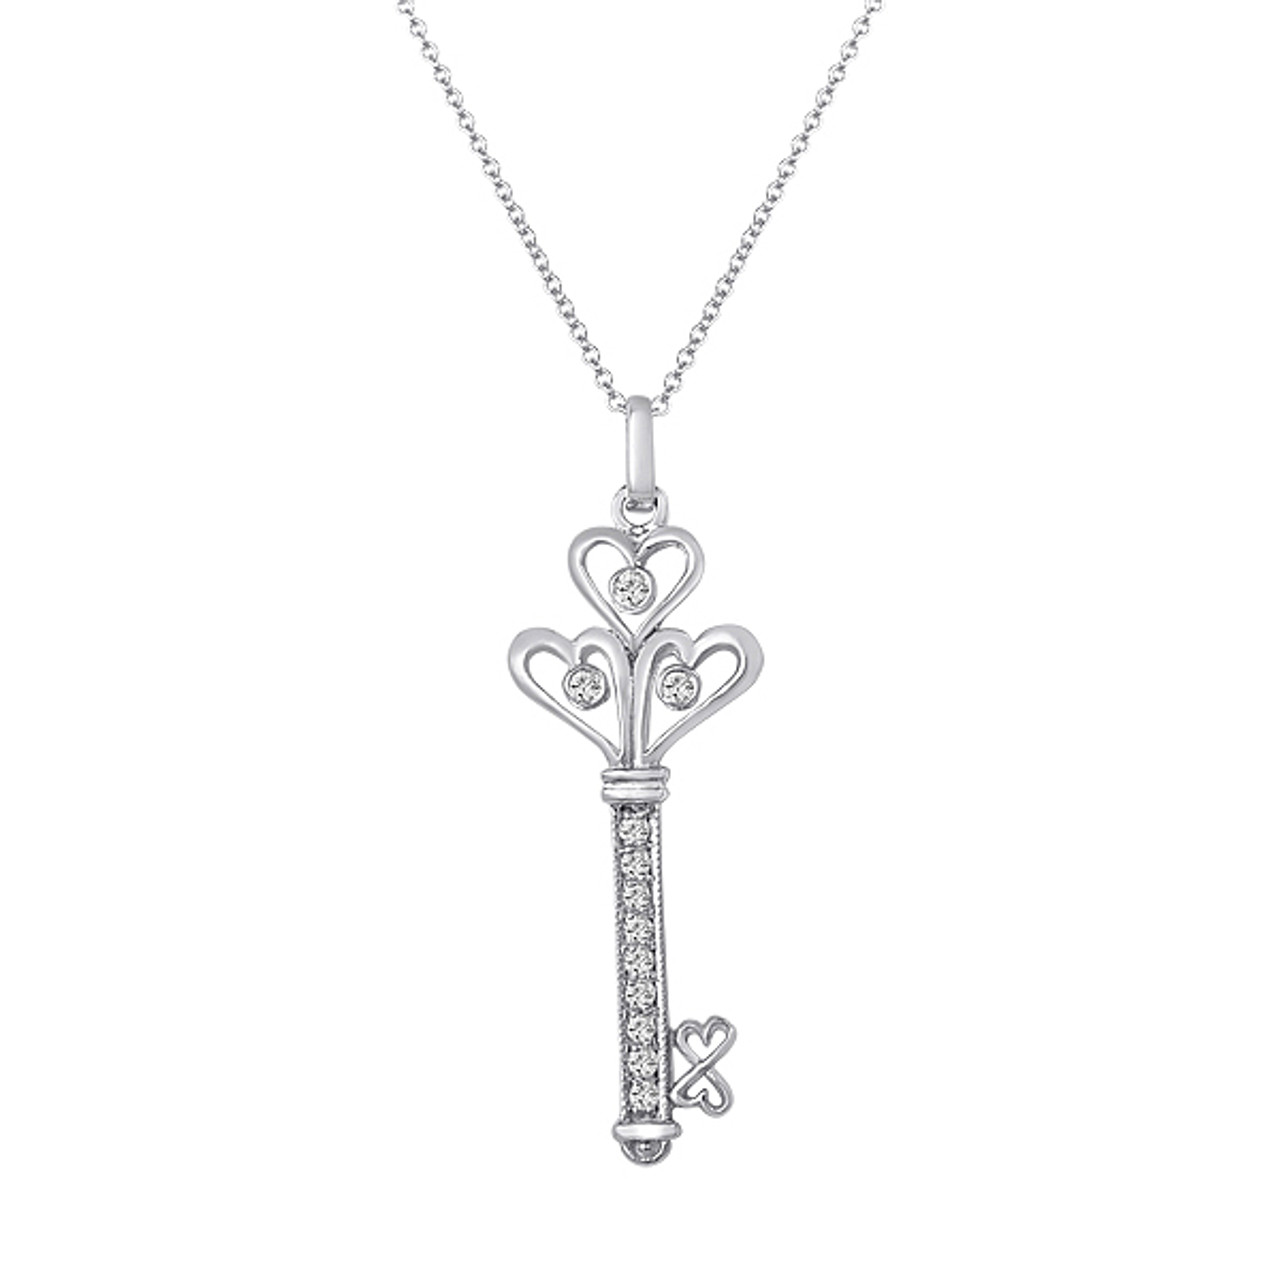 Key To Your Heart Diamond Love Pendant Necklace 14k White Gold 0 25 Ct Pave Set Handmade